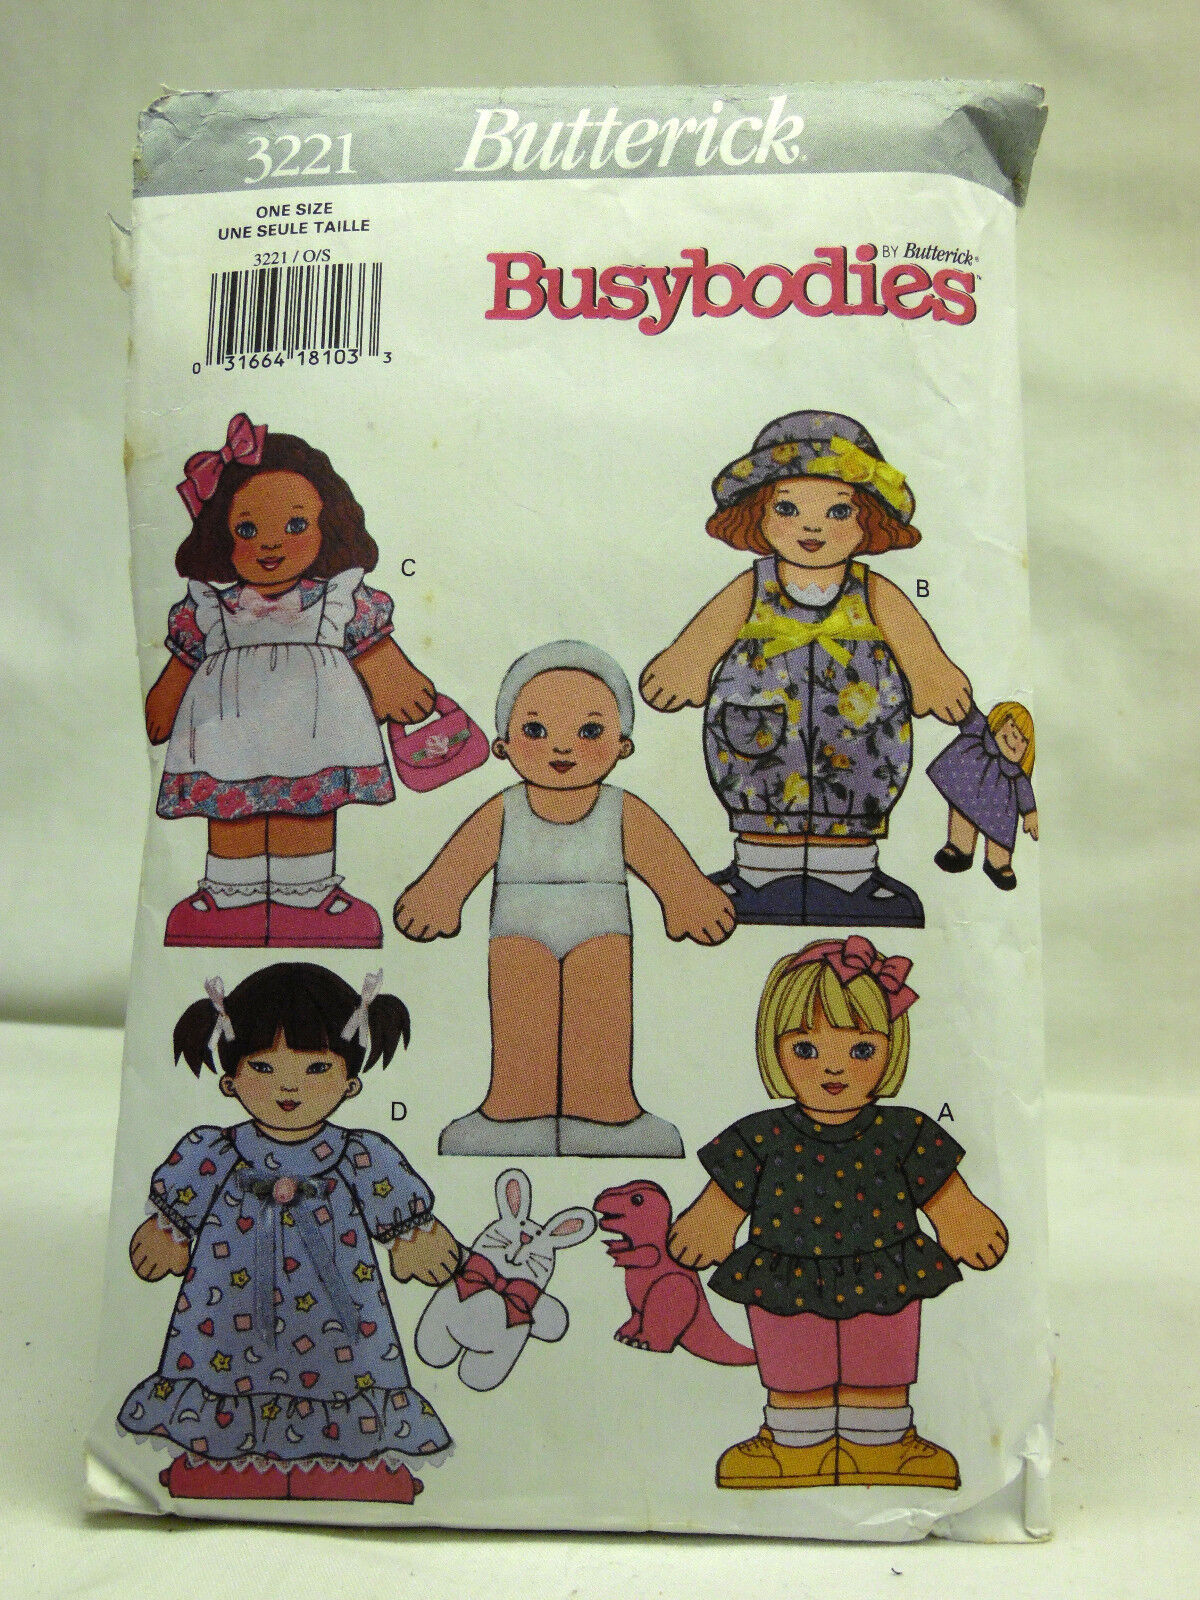 Butterick Sewing Pattern # 3221, Busy Bodies No Sew Dolls